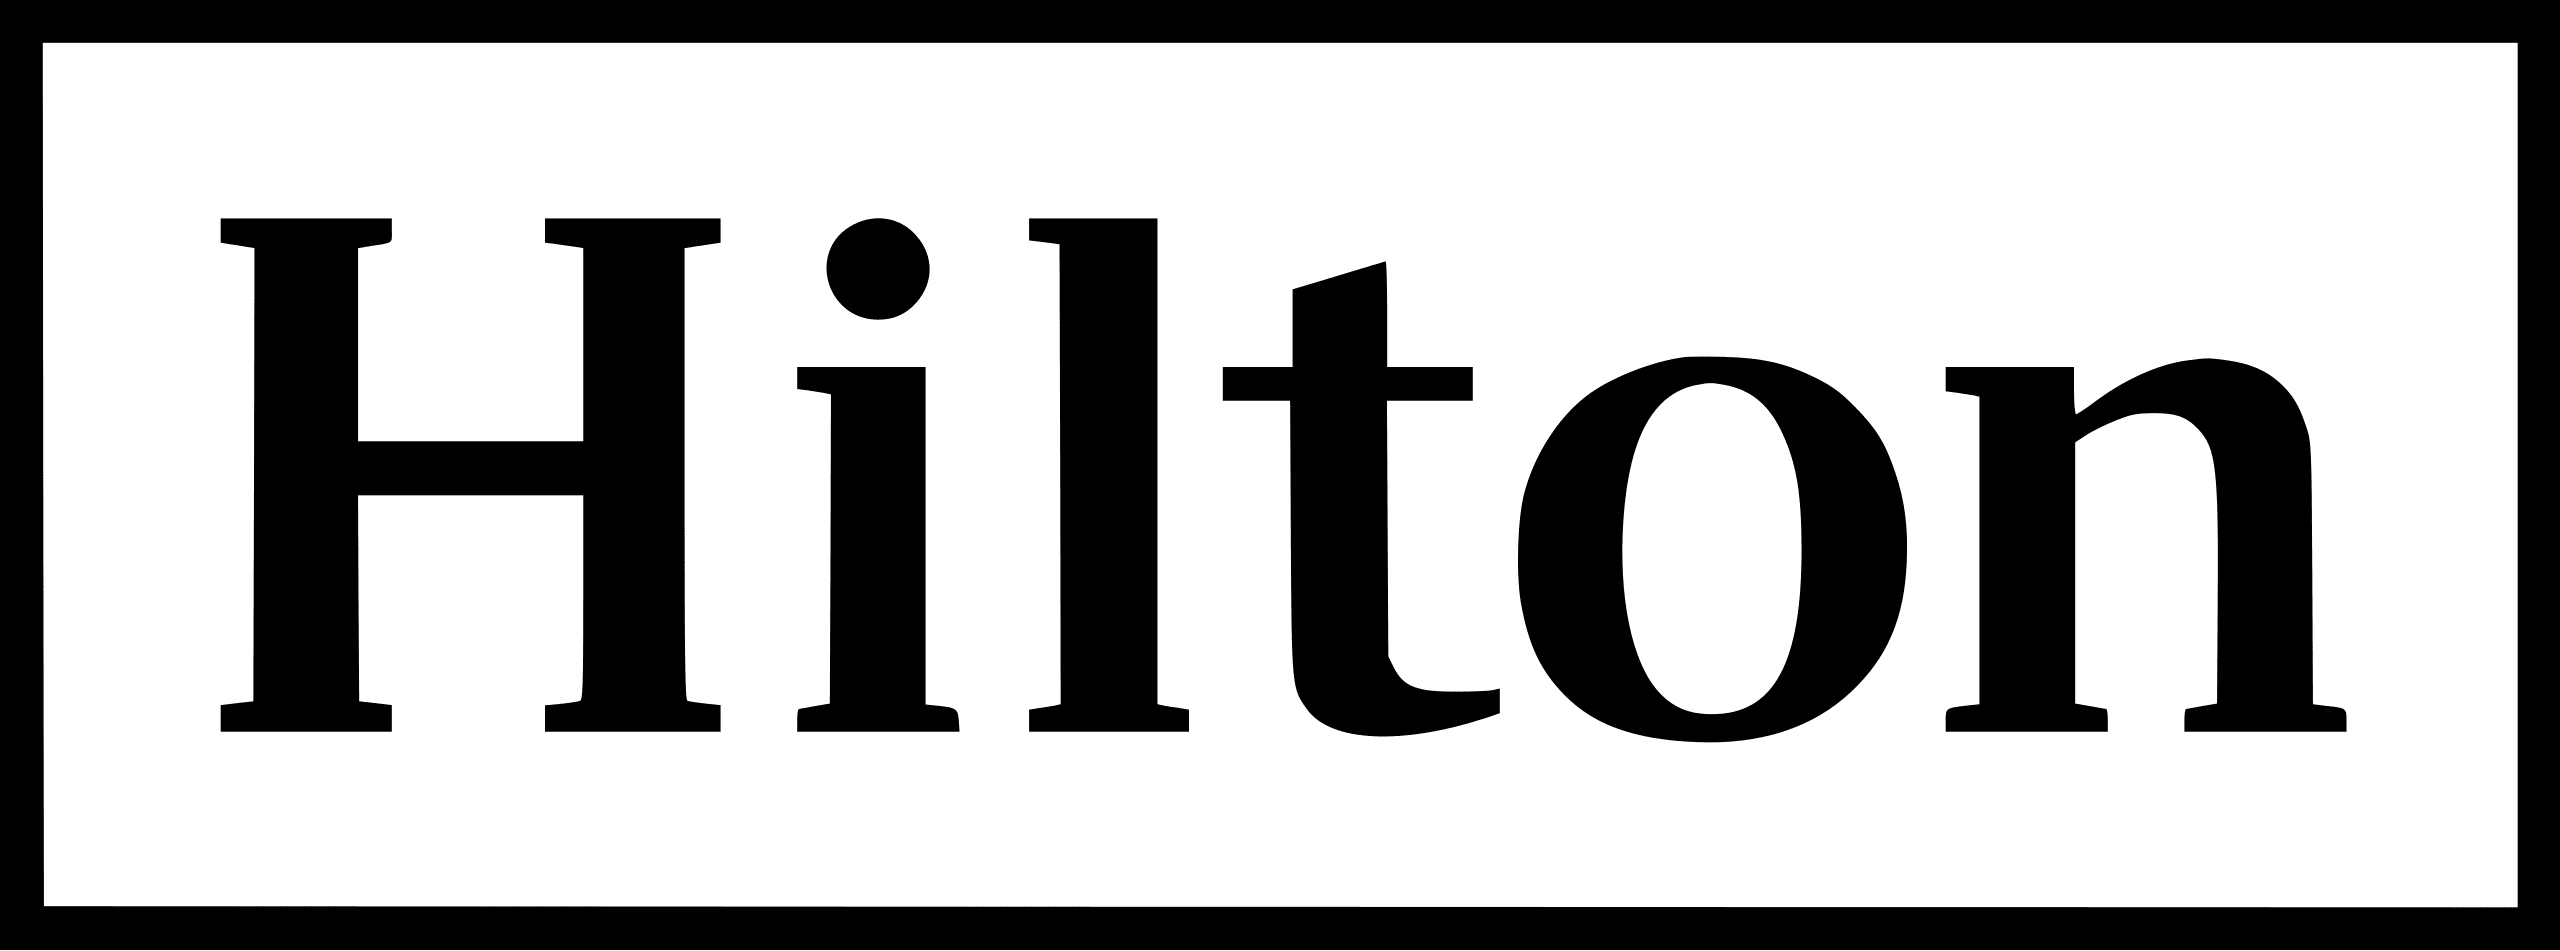 Hilton logo with bold, black letters on a dark green background.